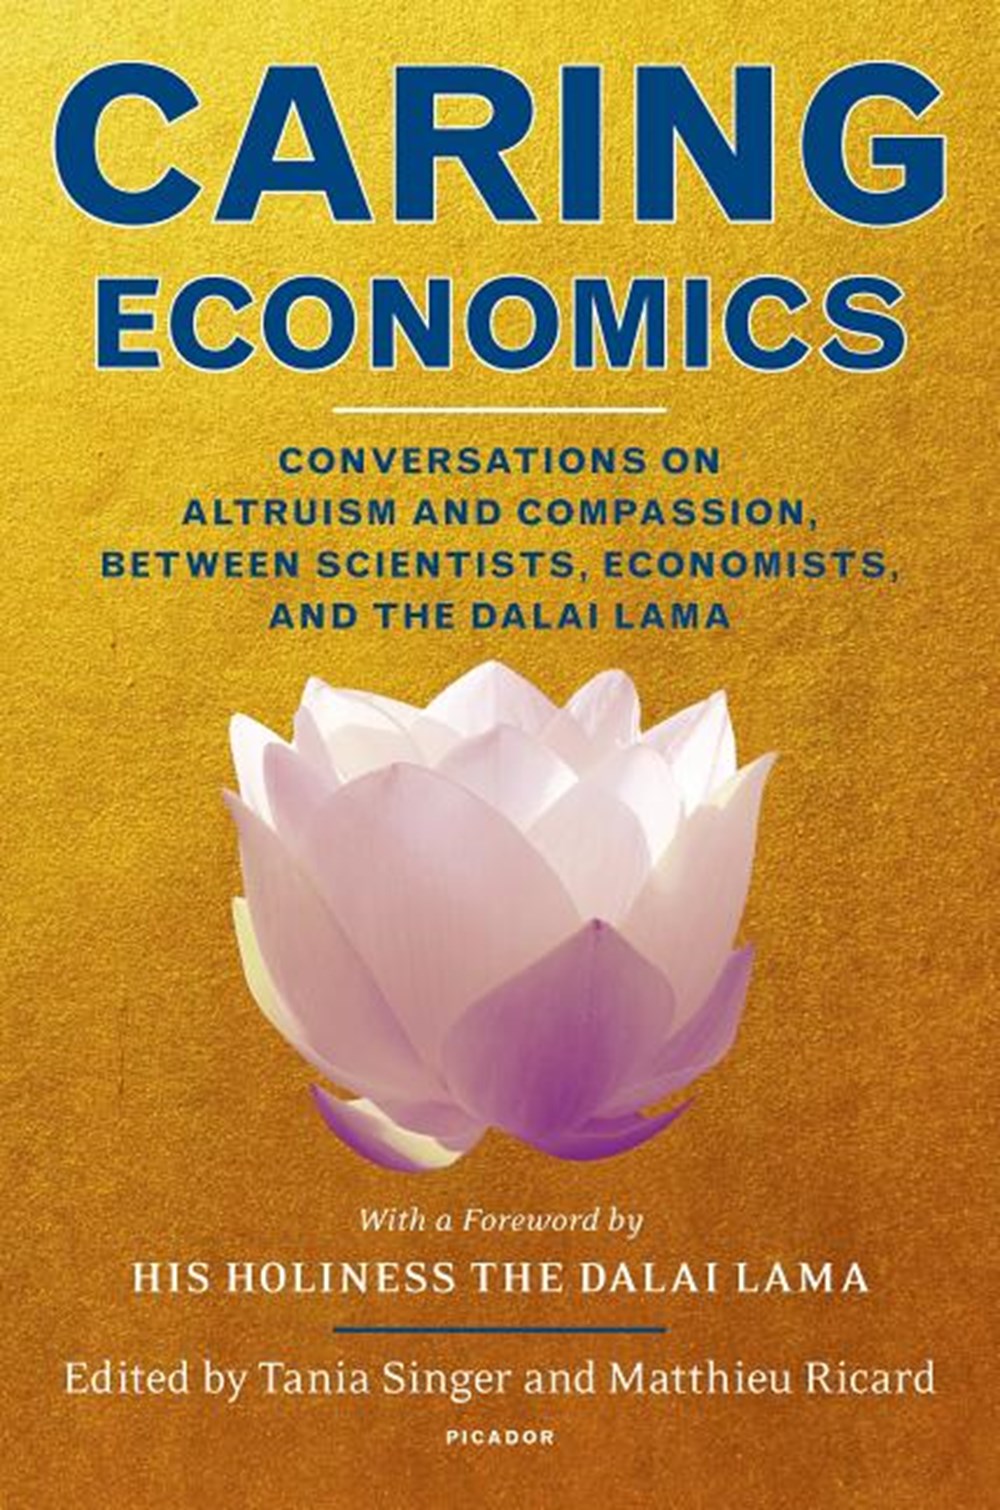 Caring Economics: Conversations on Altruism and Compassion, Between Scientists, Economists, and the 